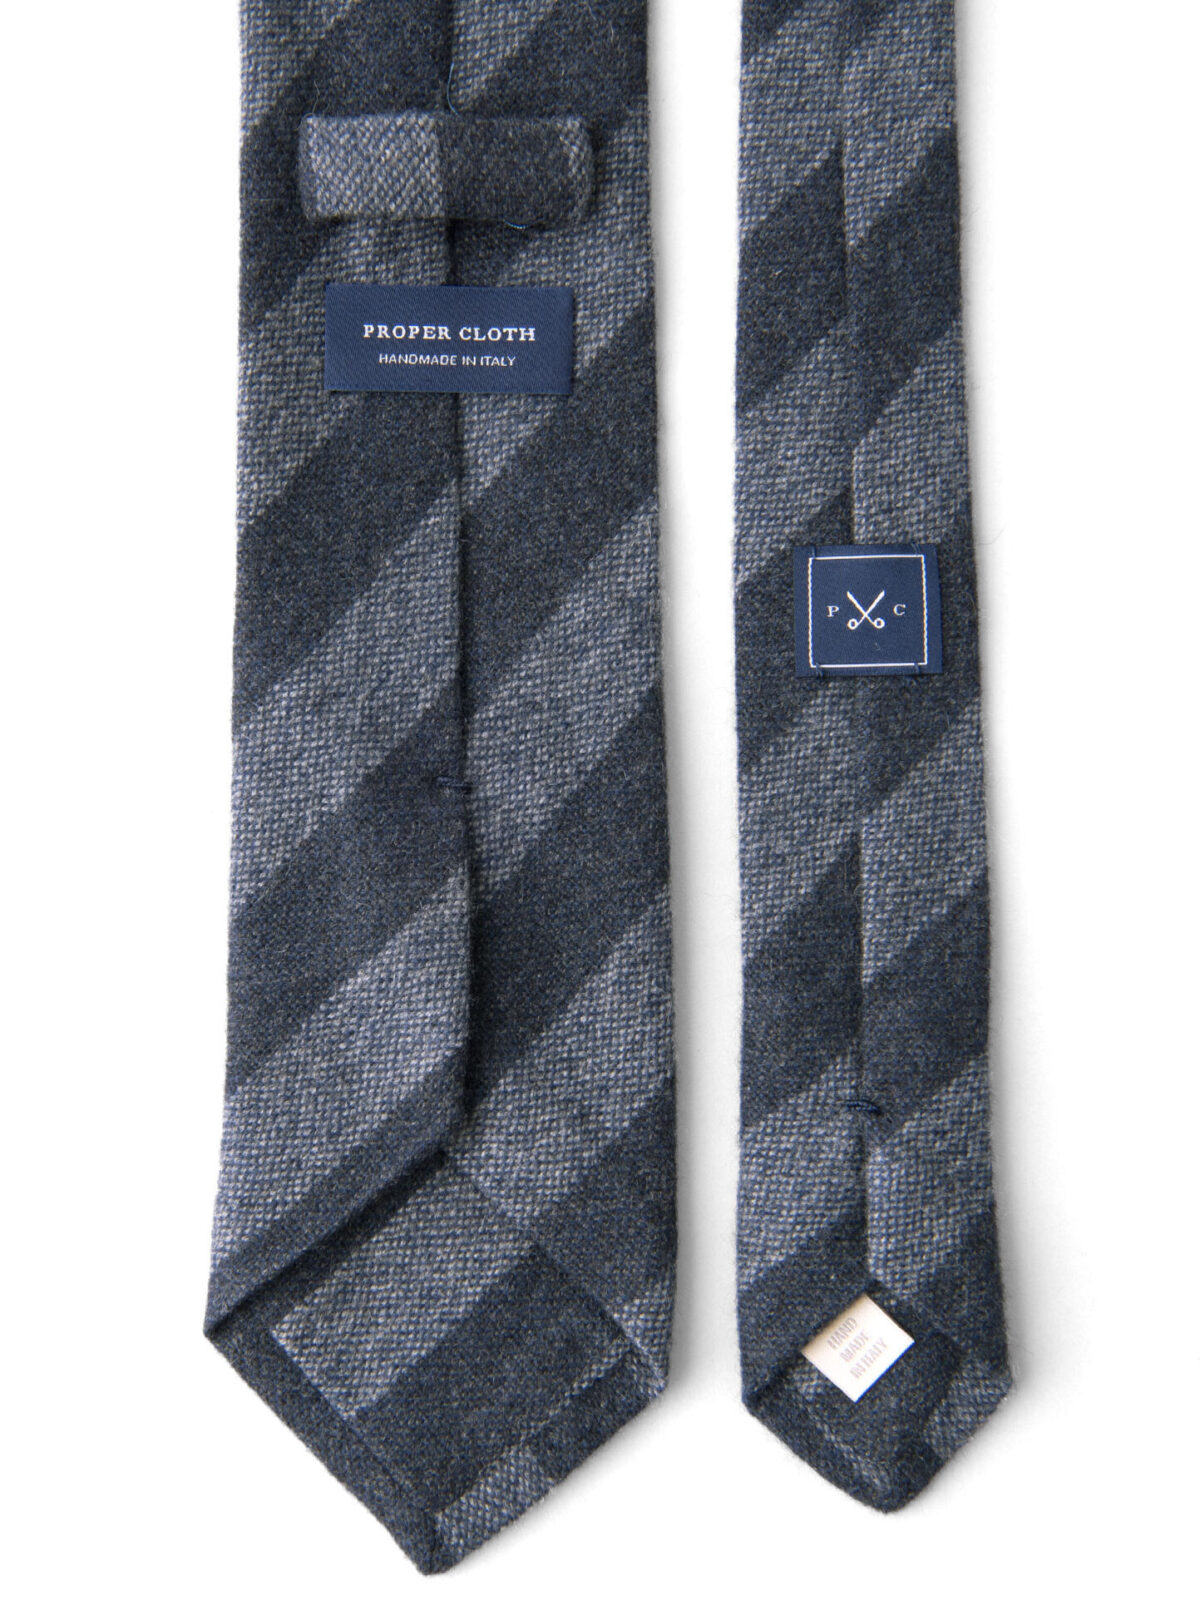 Grey and Charcoal Striped Cashmere Tie